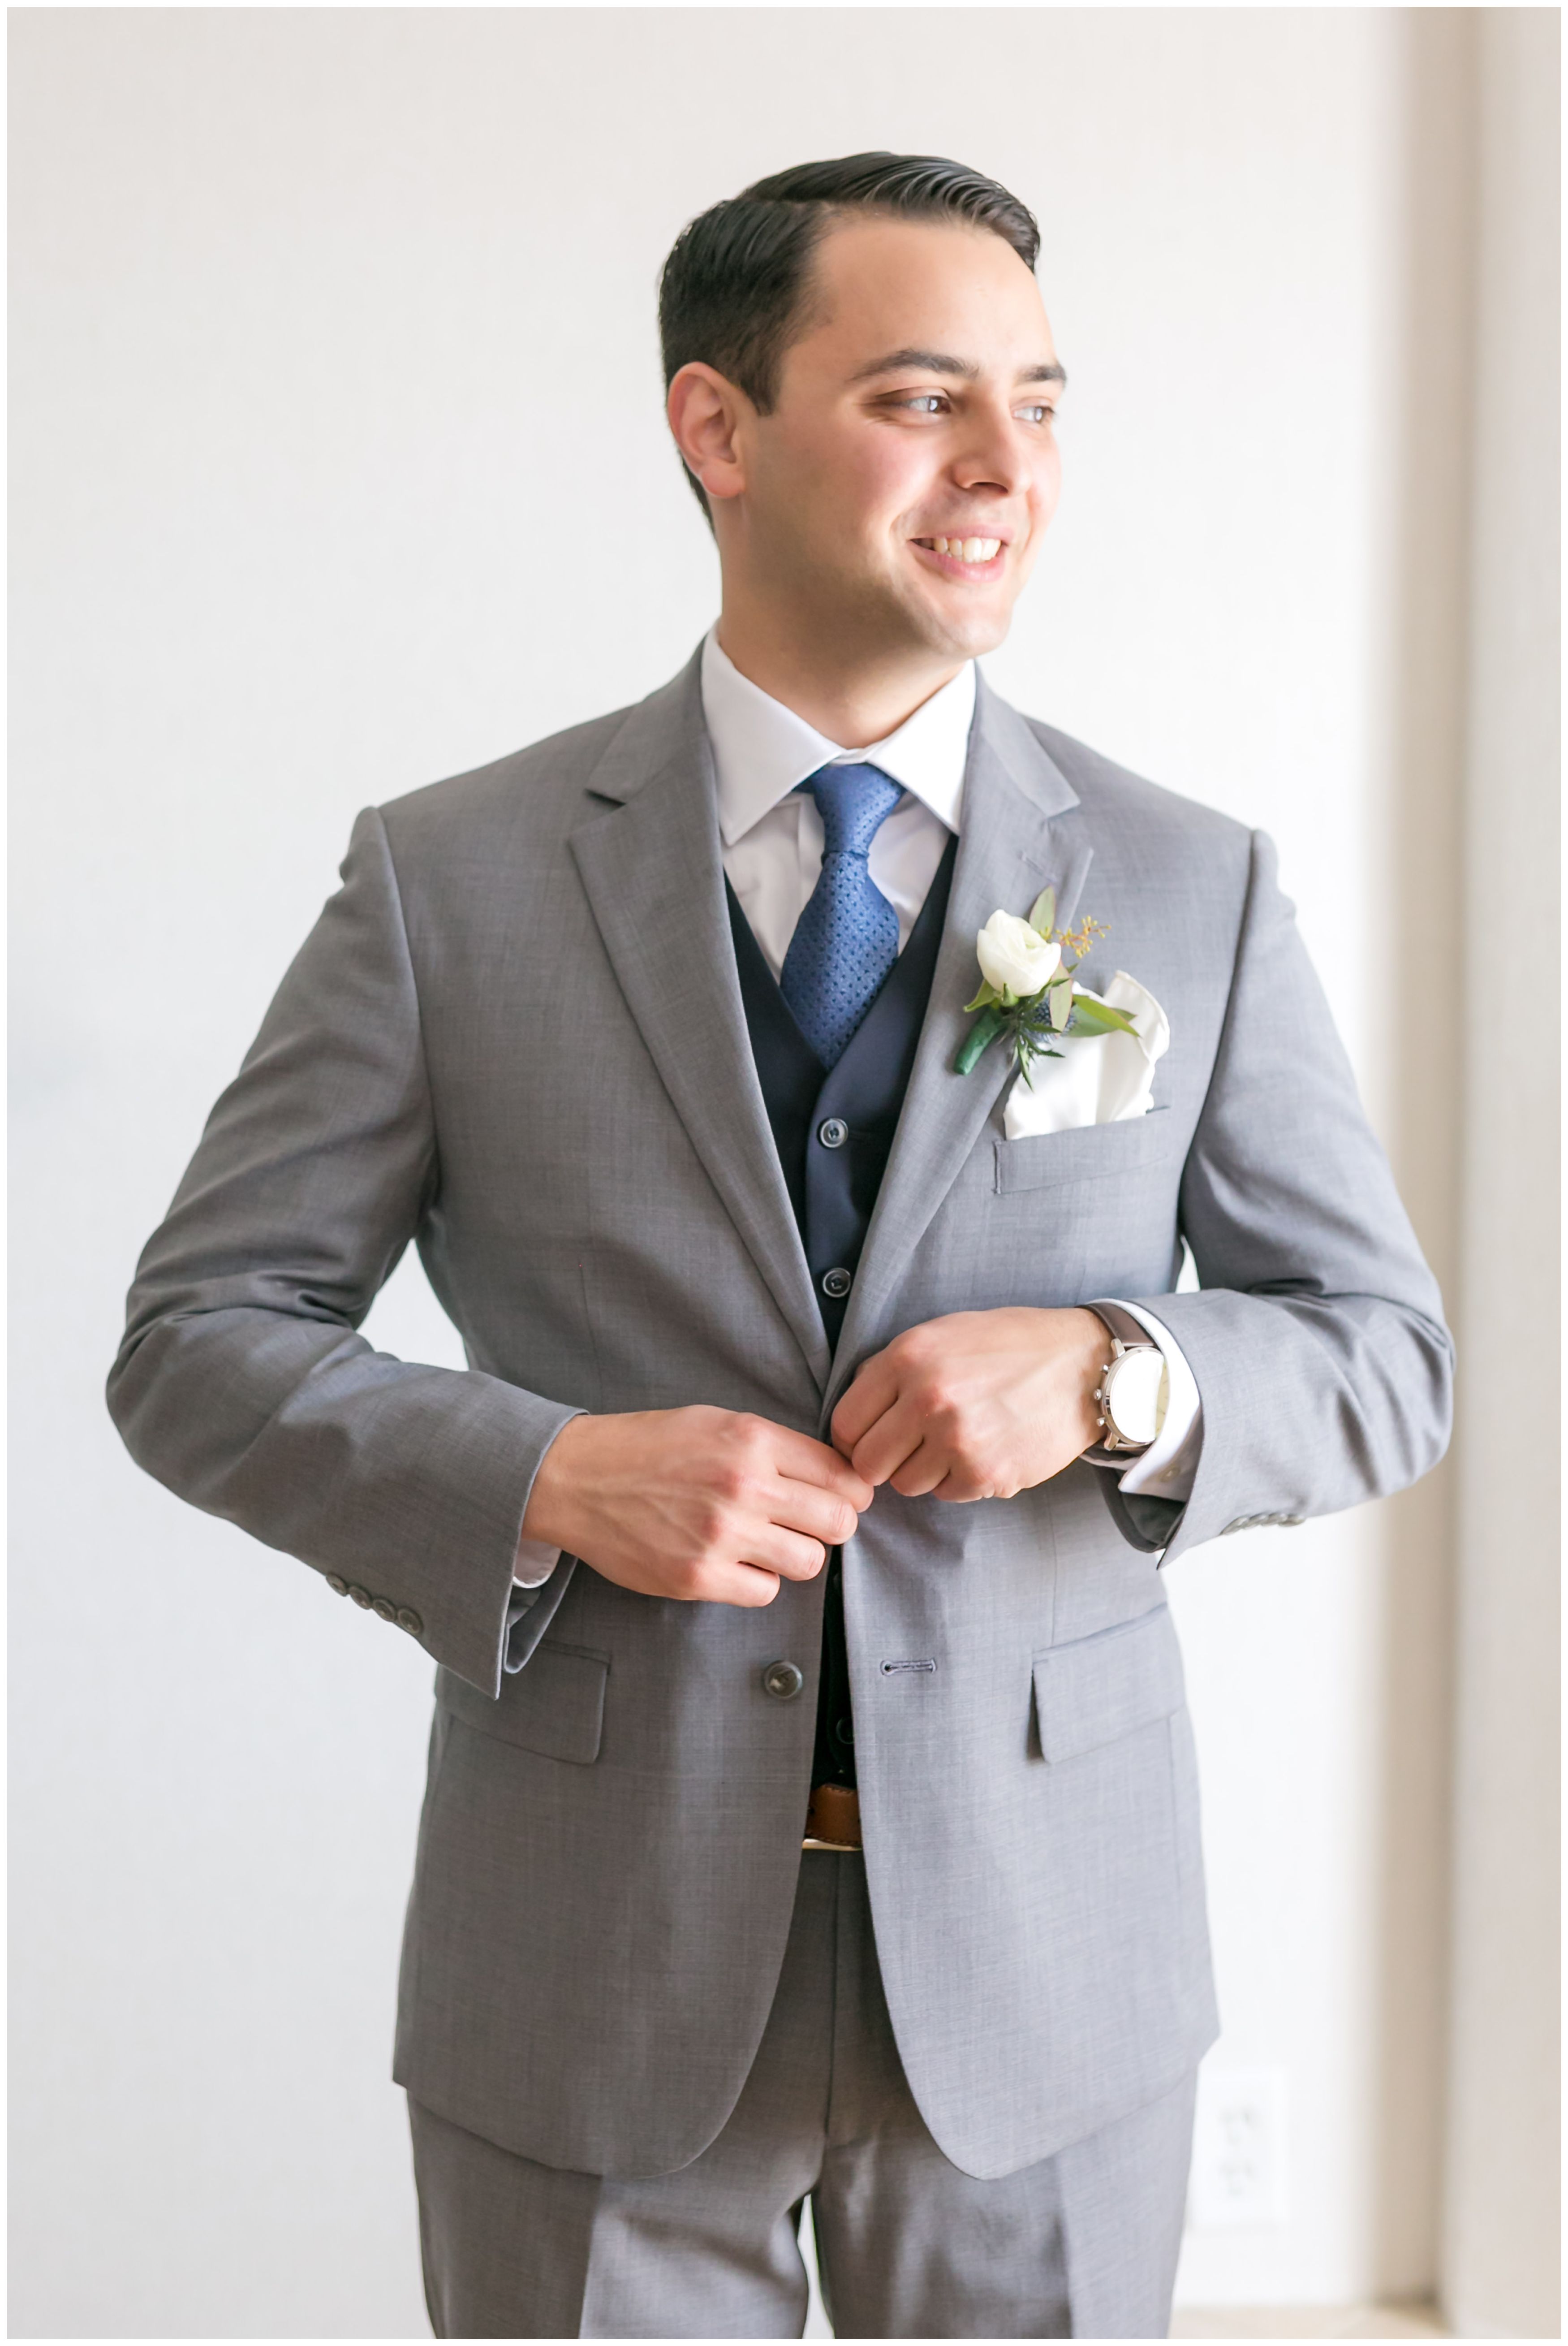 Groom light gray suit with navy vest and tie getting ready